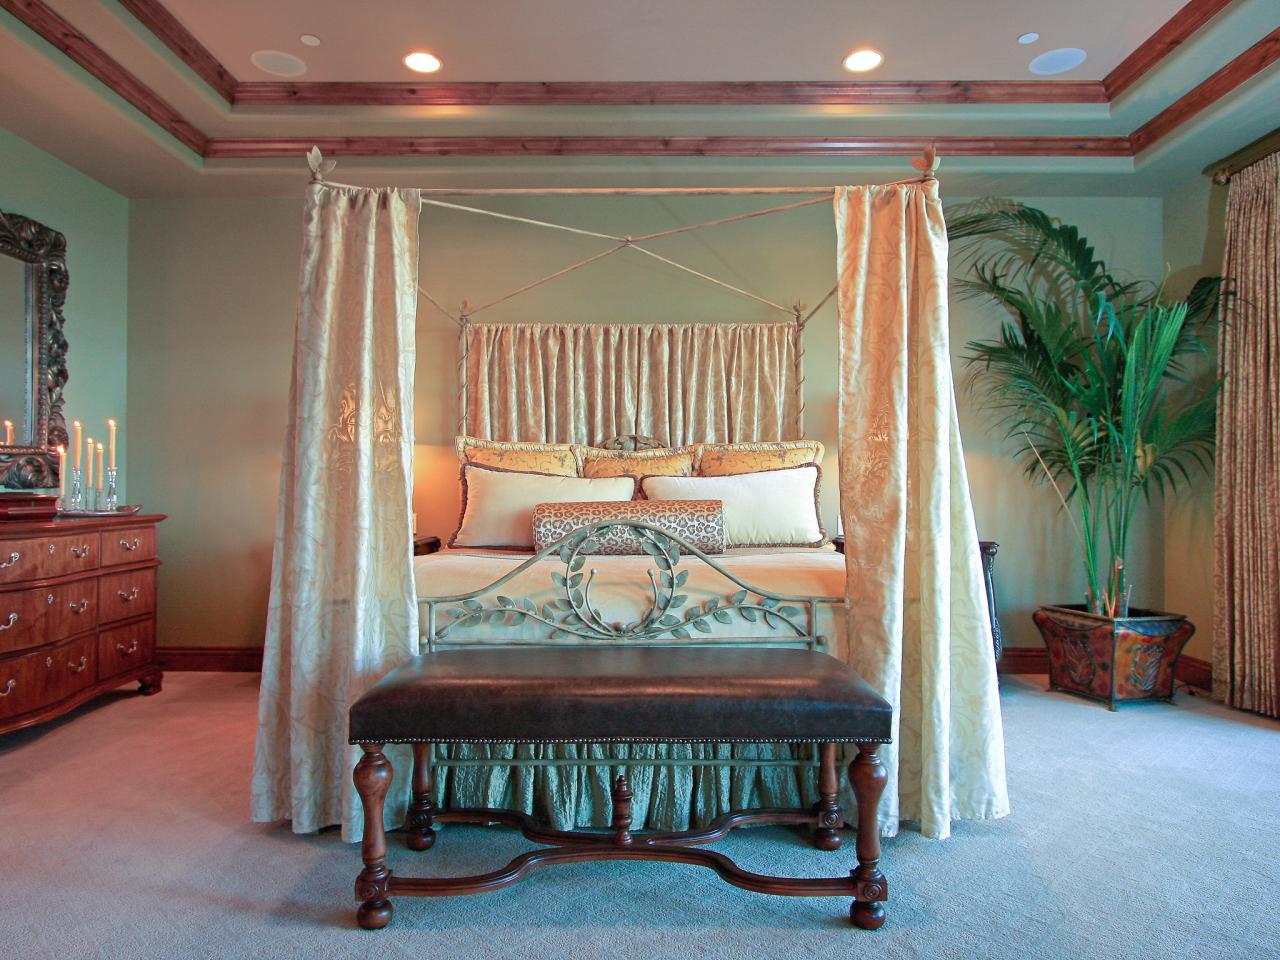 Tray Ceilings in Bedrooms Pictures, Options, Tips & Ideas   HGTV